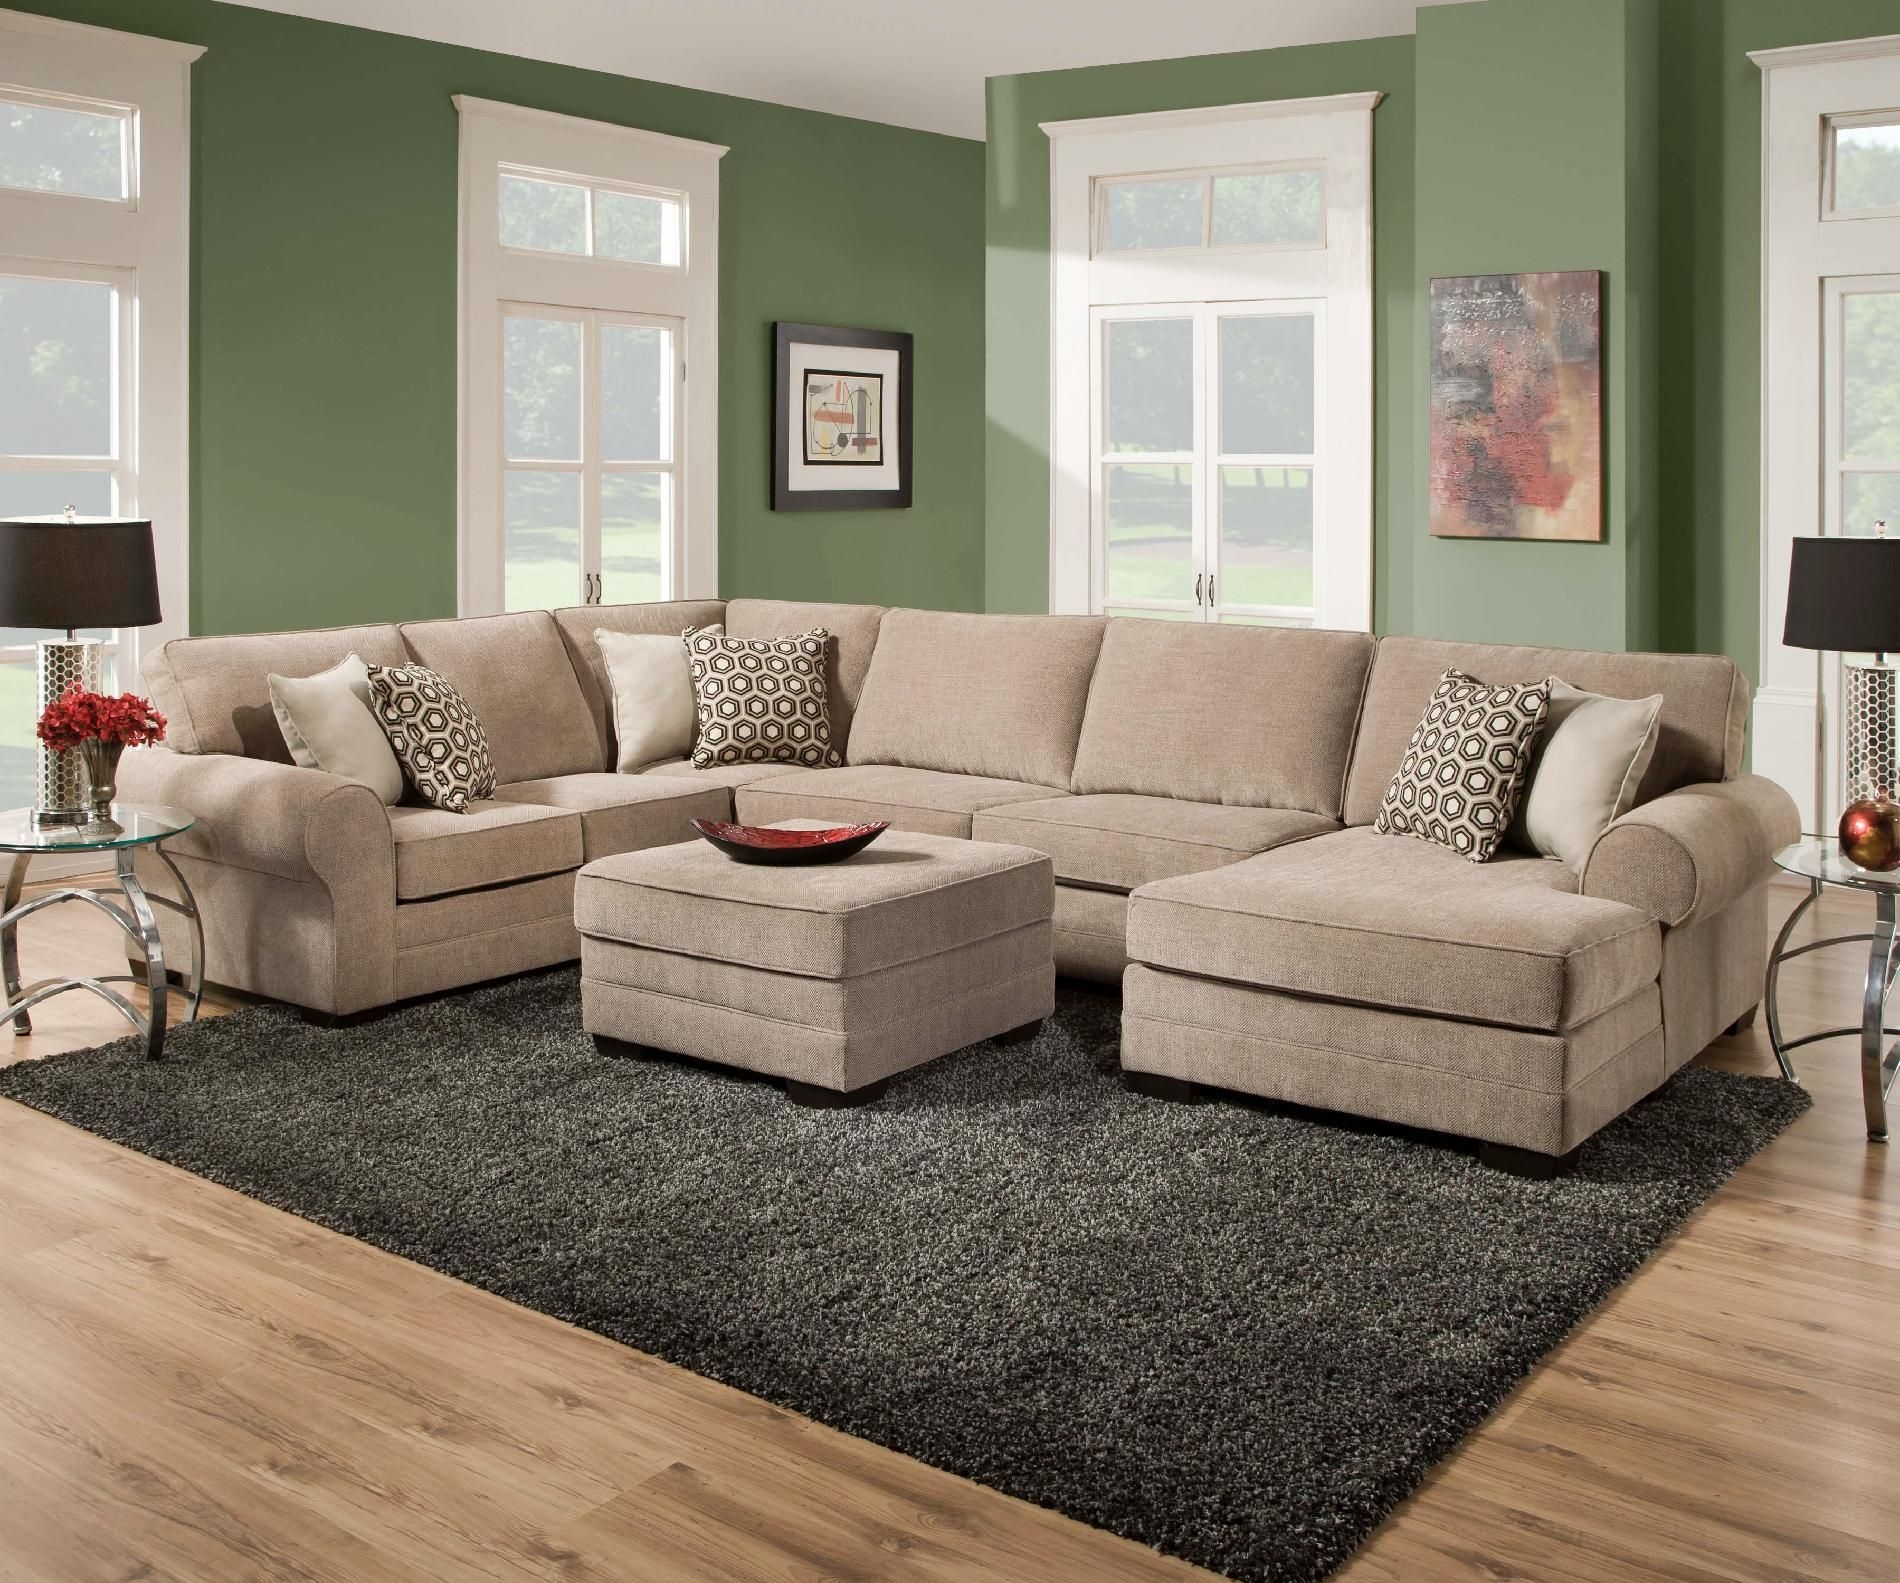 Simmons brooklyn sectional